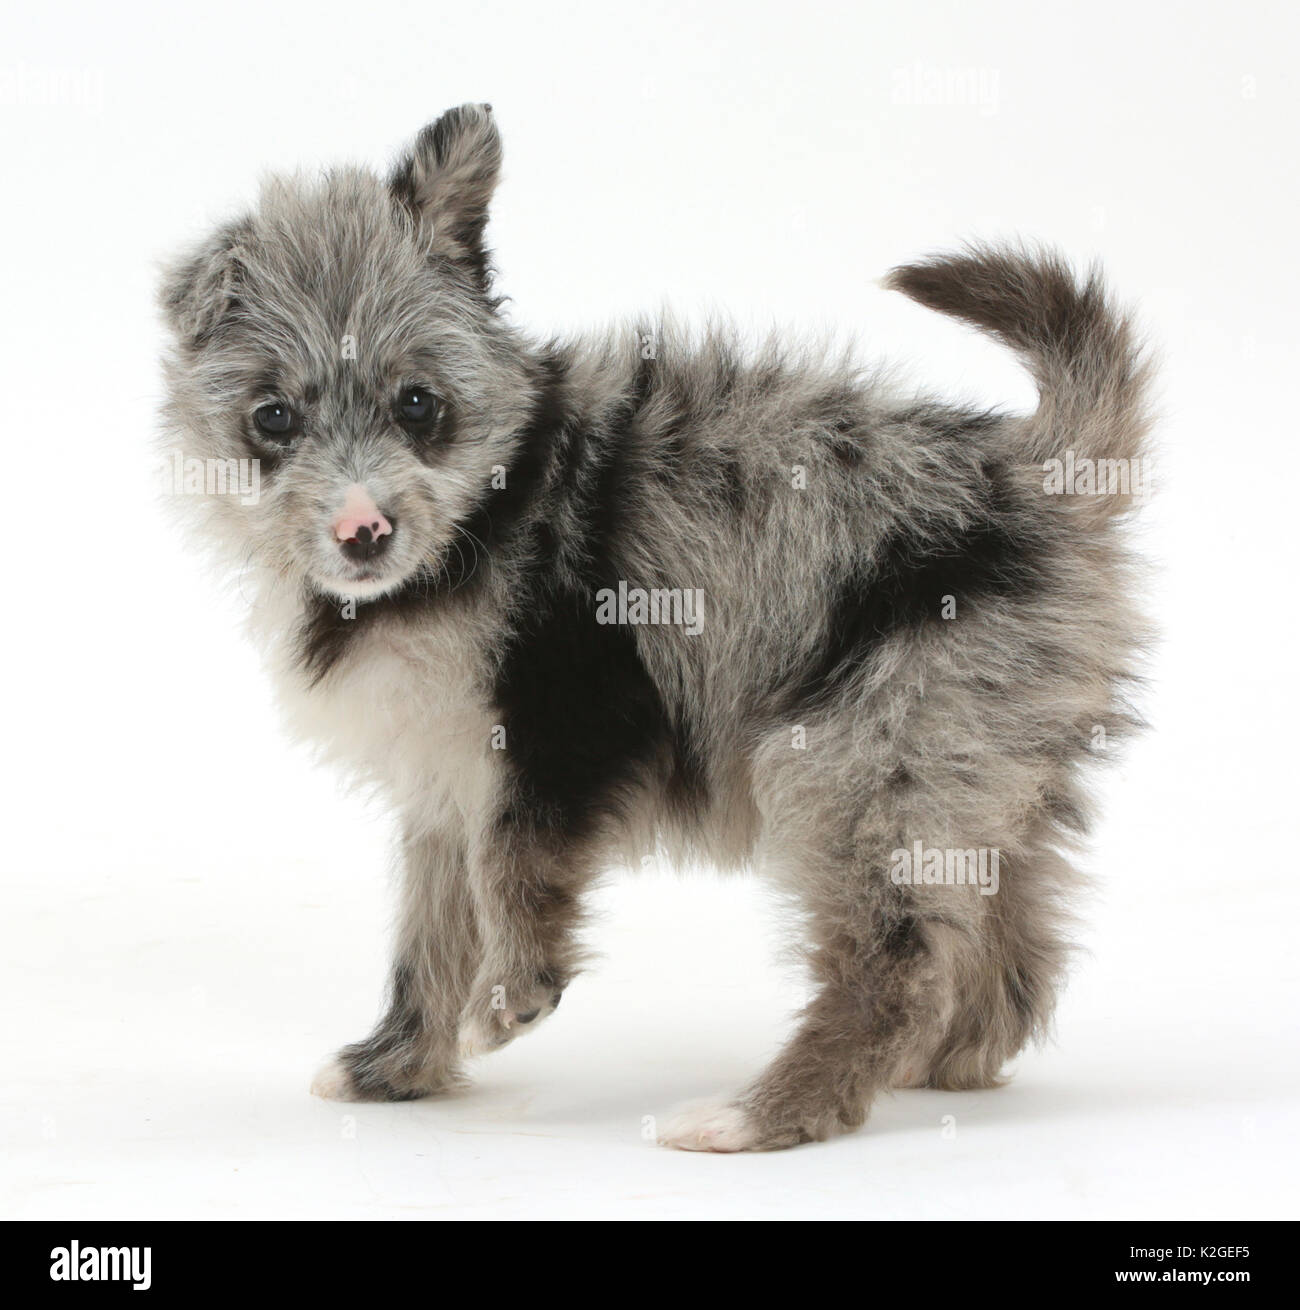 ChiPoo puppy, Chihuahua cross Poodle, Roxy, age 12 weeks, standing. Stock Photo